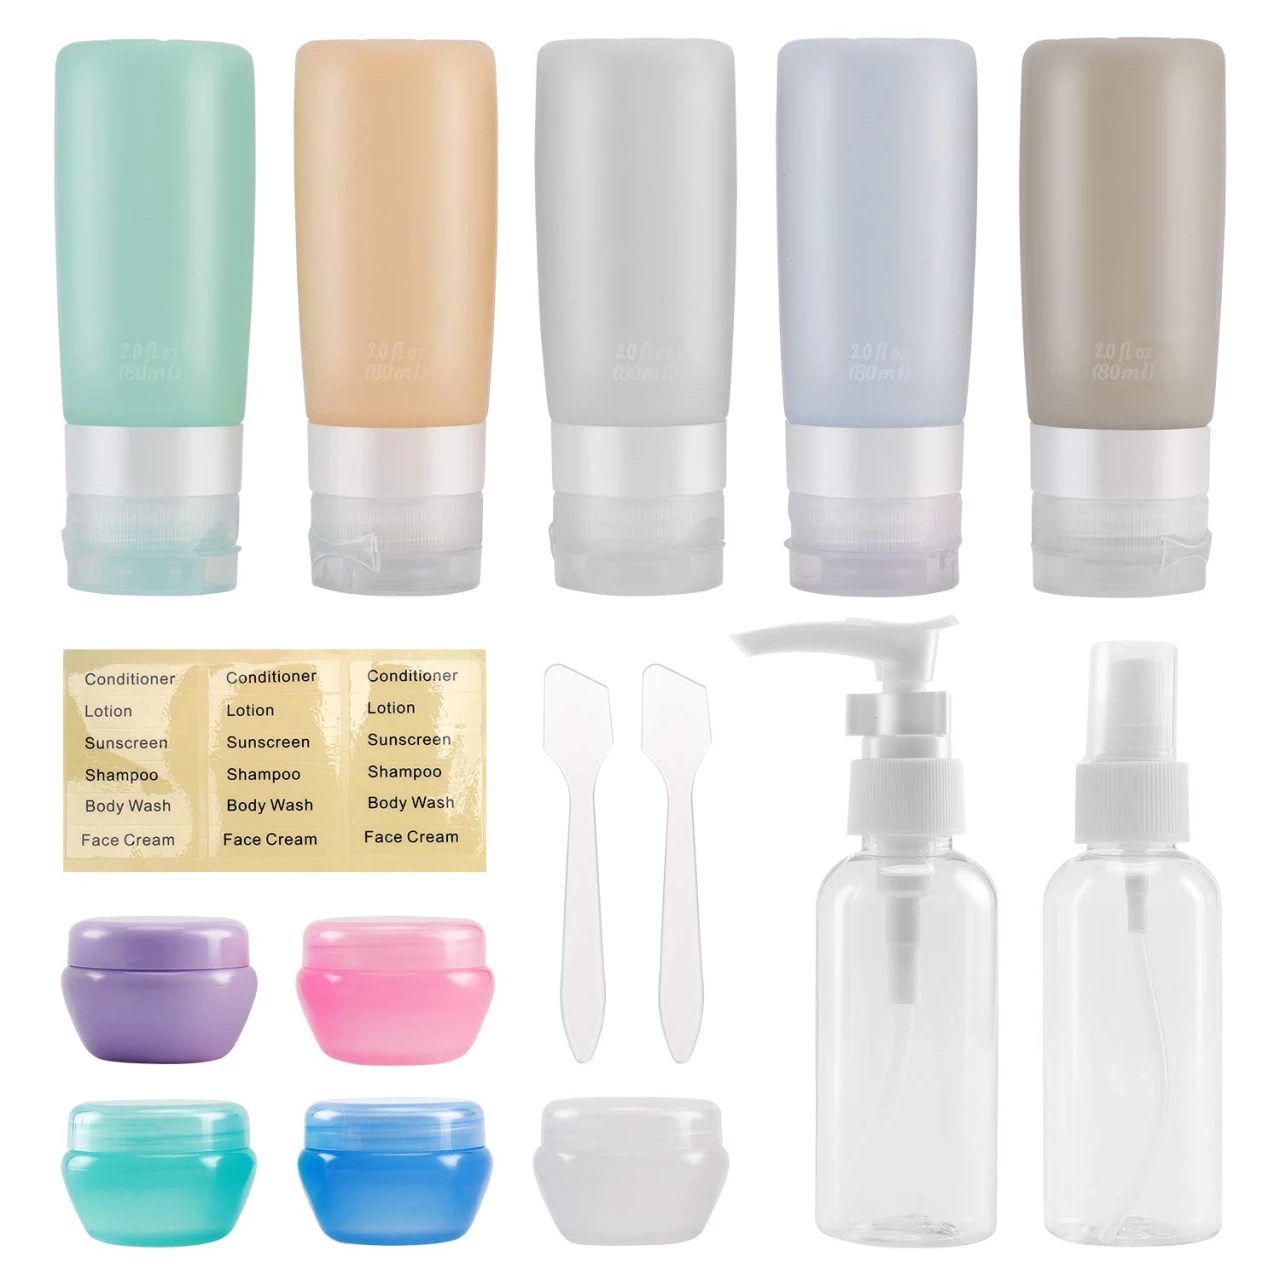 Beveetio Travel Bottles TSA Approved 15 Pack,2.9oz Silicone Refillable Size Containers, BPA Free Travel Tubes Toiletries